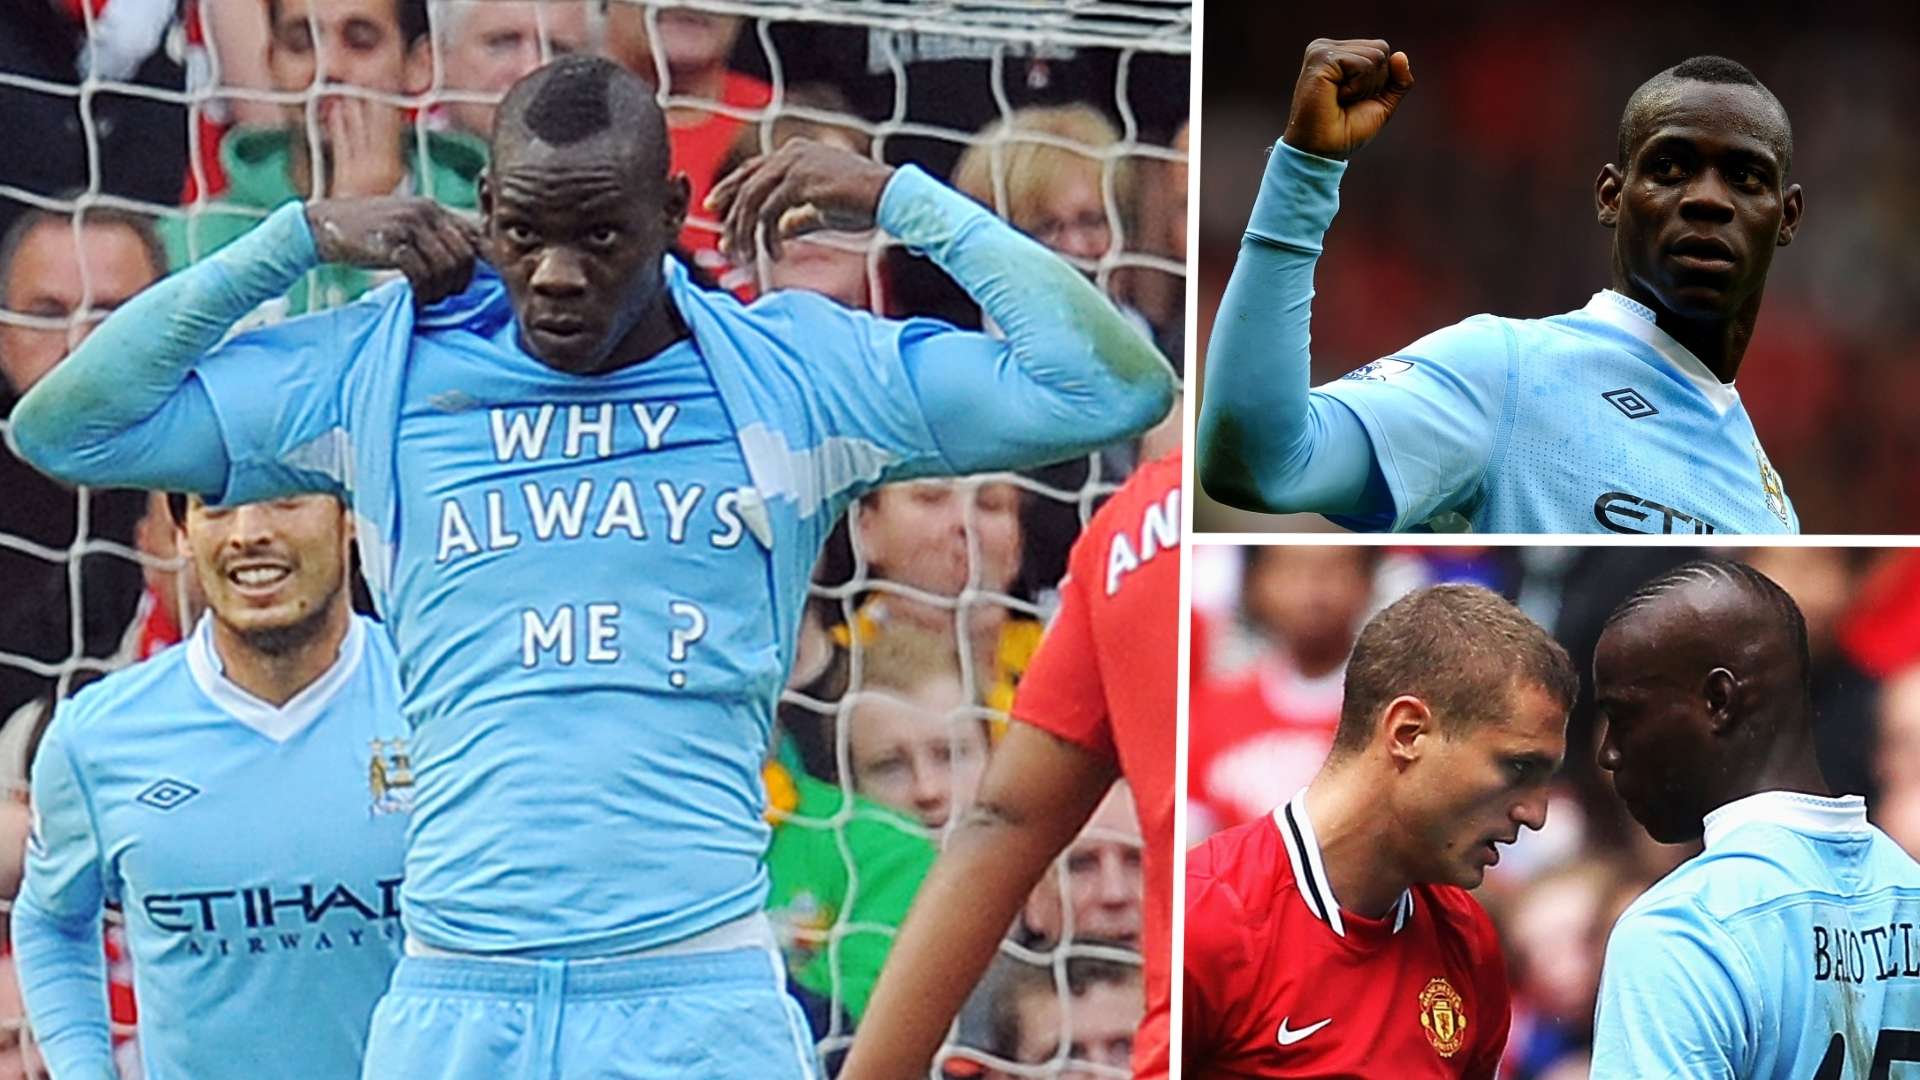 Mario Balotelli Manchester City Manchester United 2011 Why Always Me?